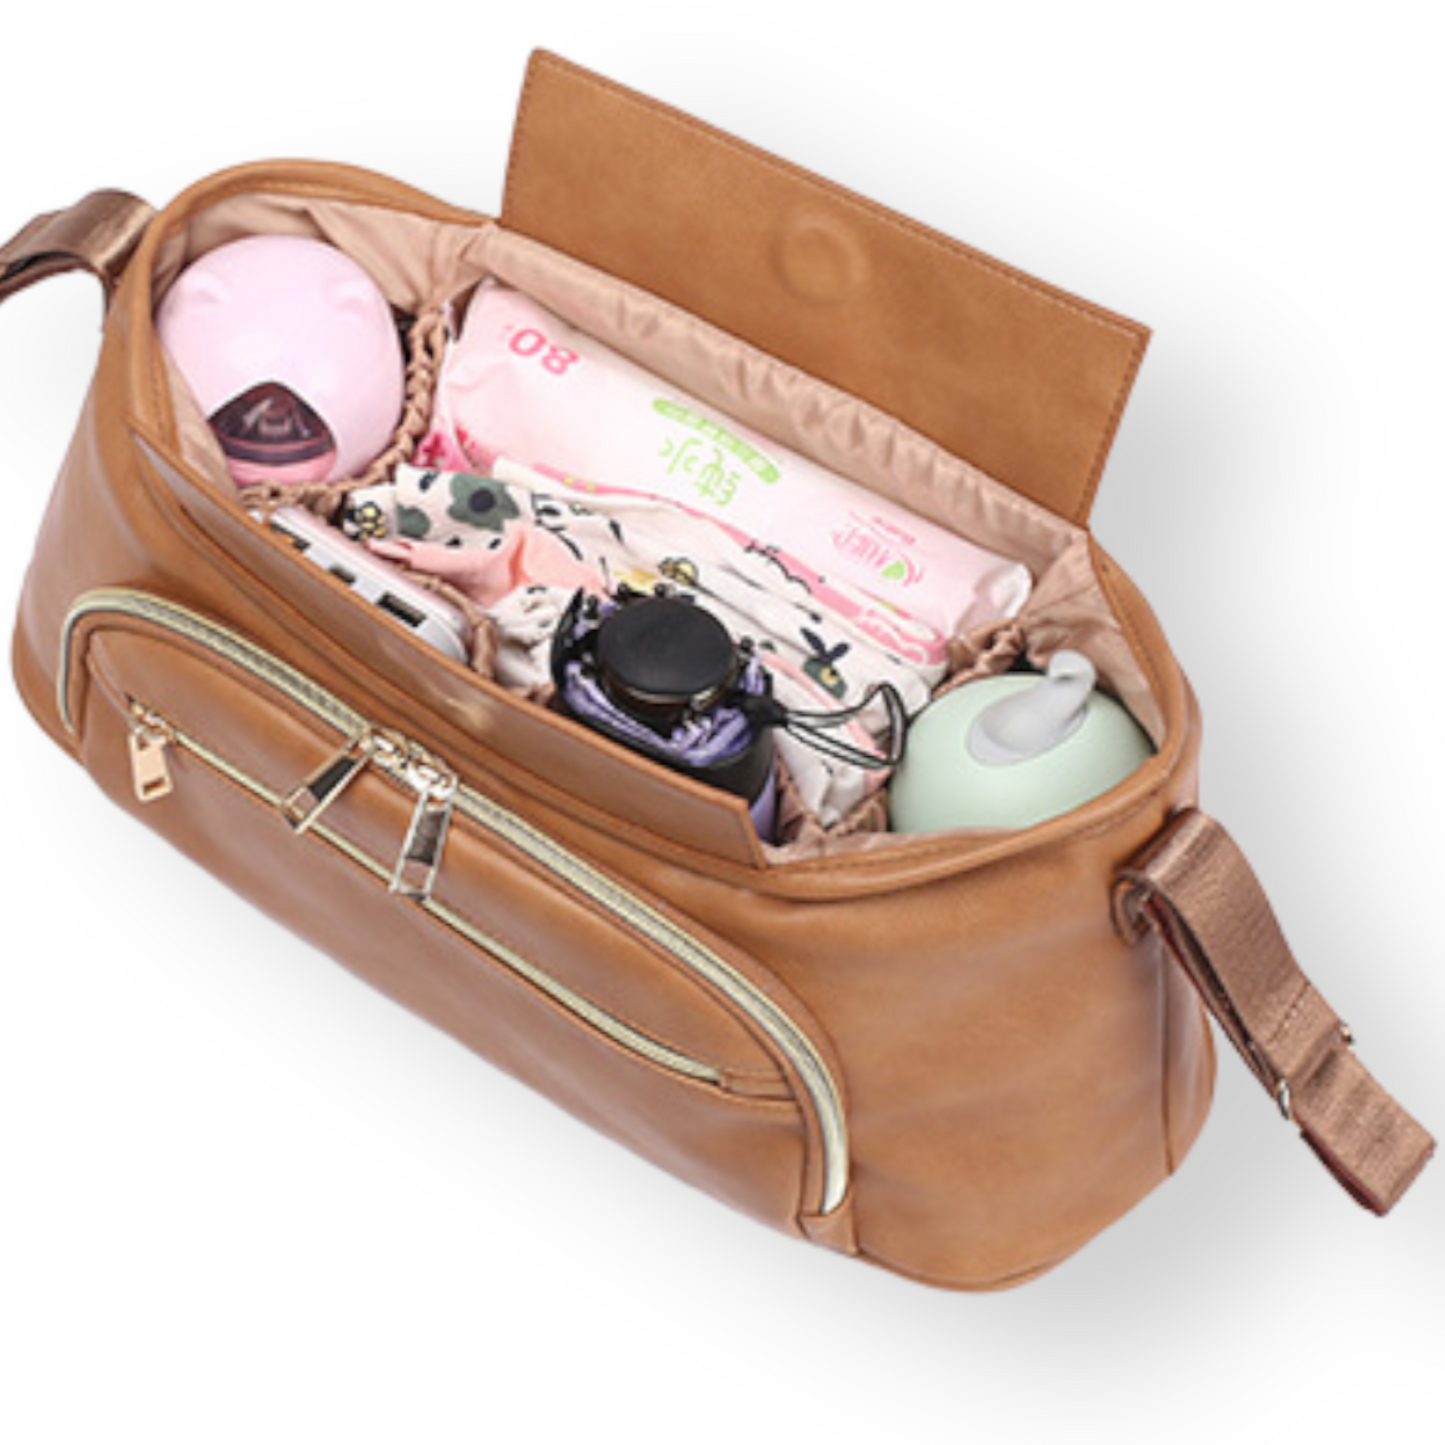 brown pram organizer bag showing everything that fits inside of it against a white background 